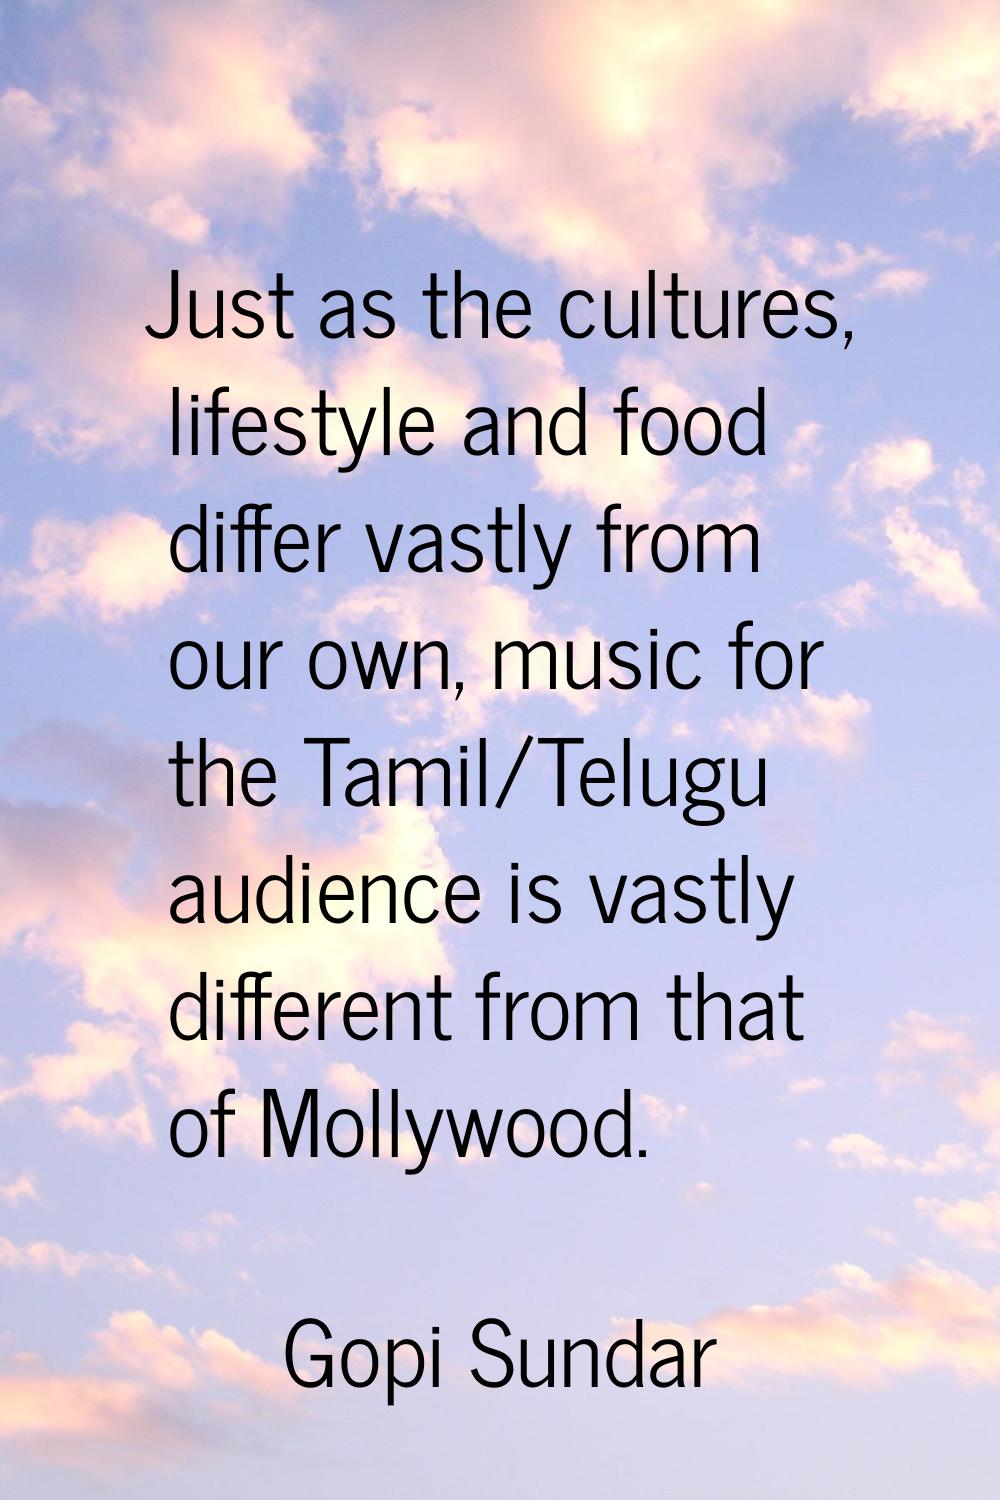 Just as the cultures, lifestyle and food differ vastly from our own, music for the Tamil/Telugu aud